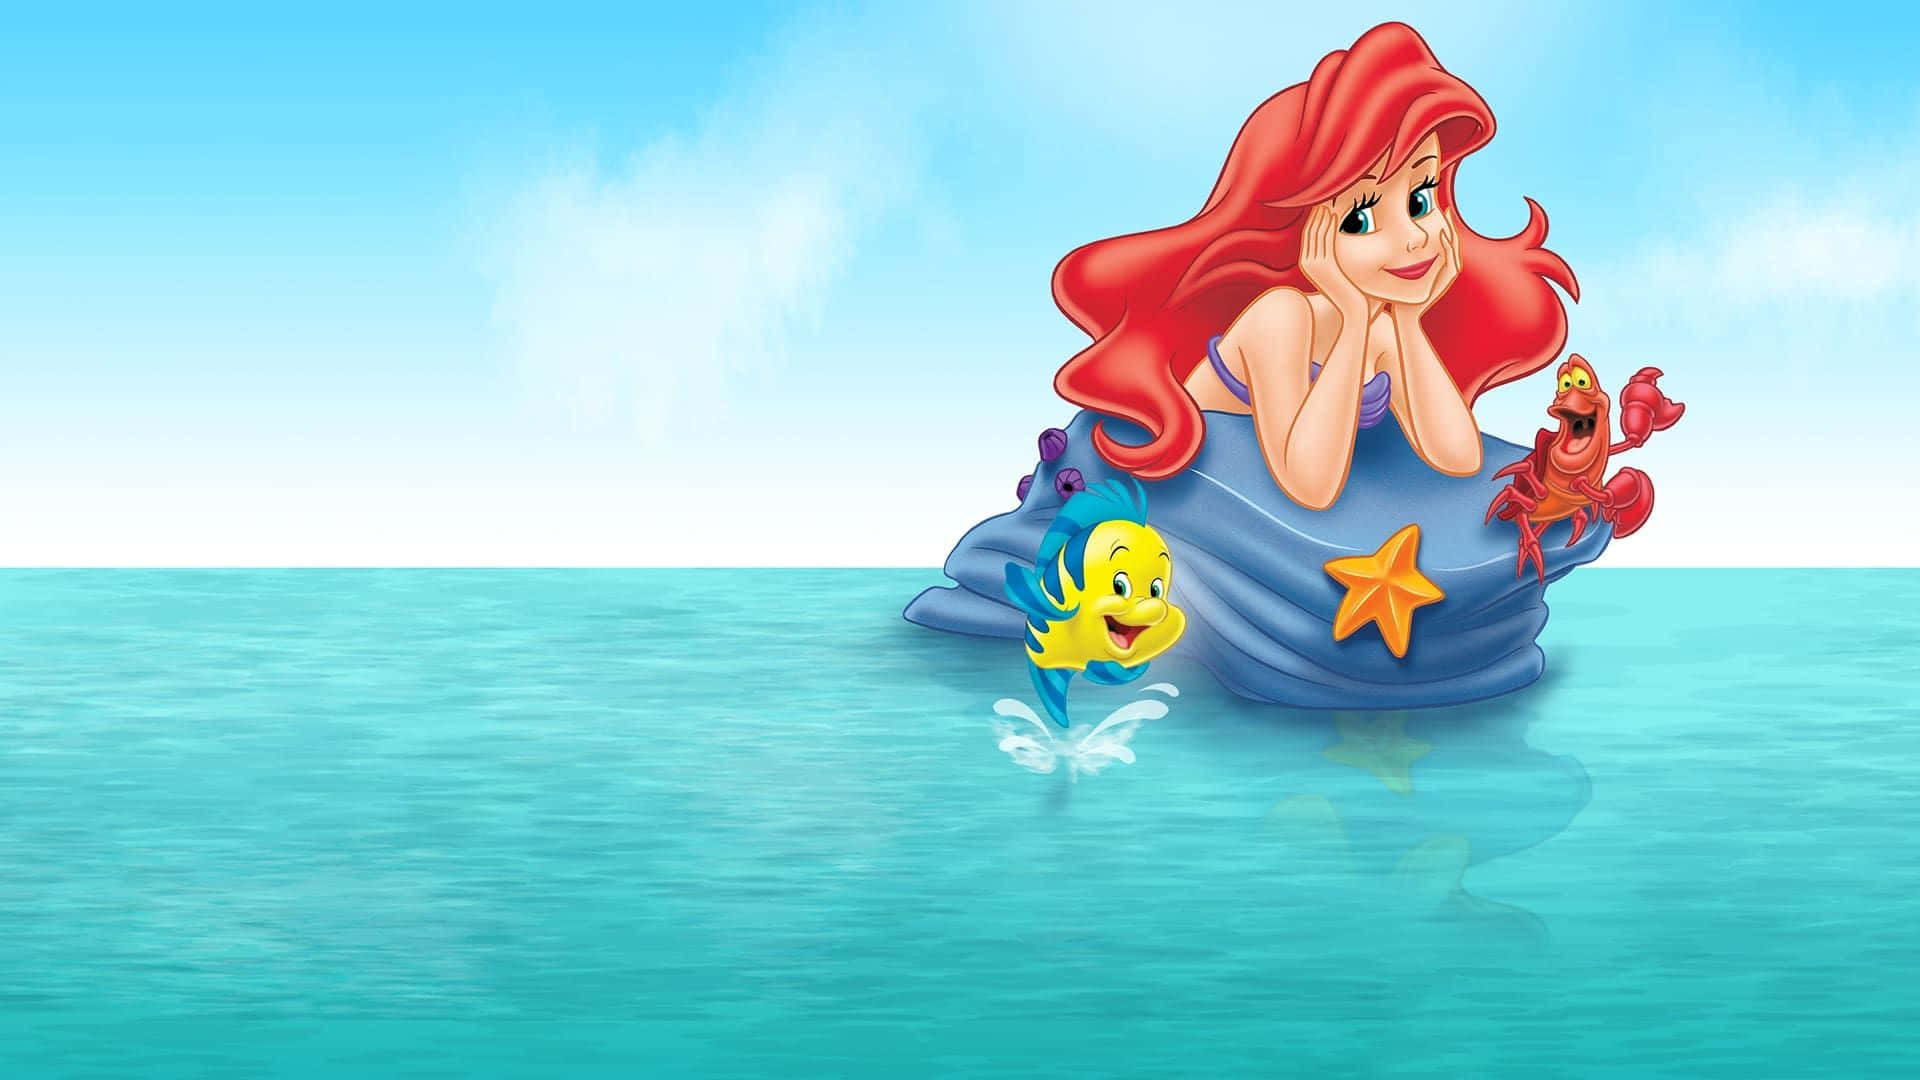 Ariel in a magical underwater moment.